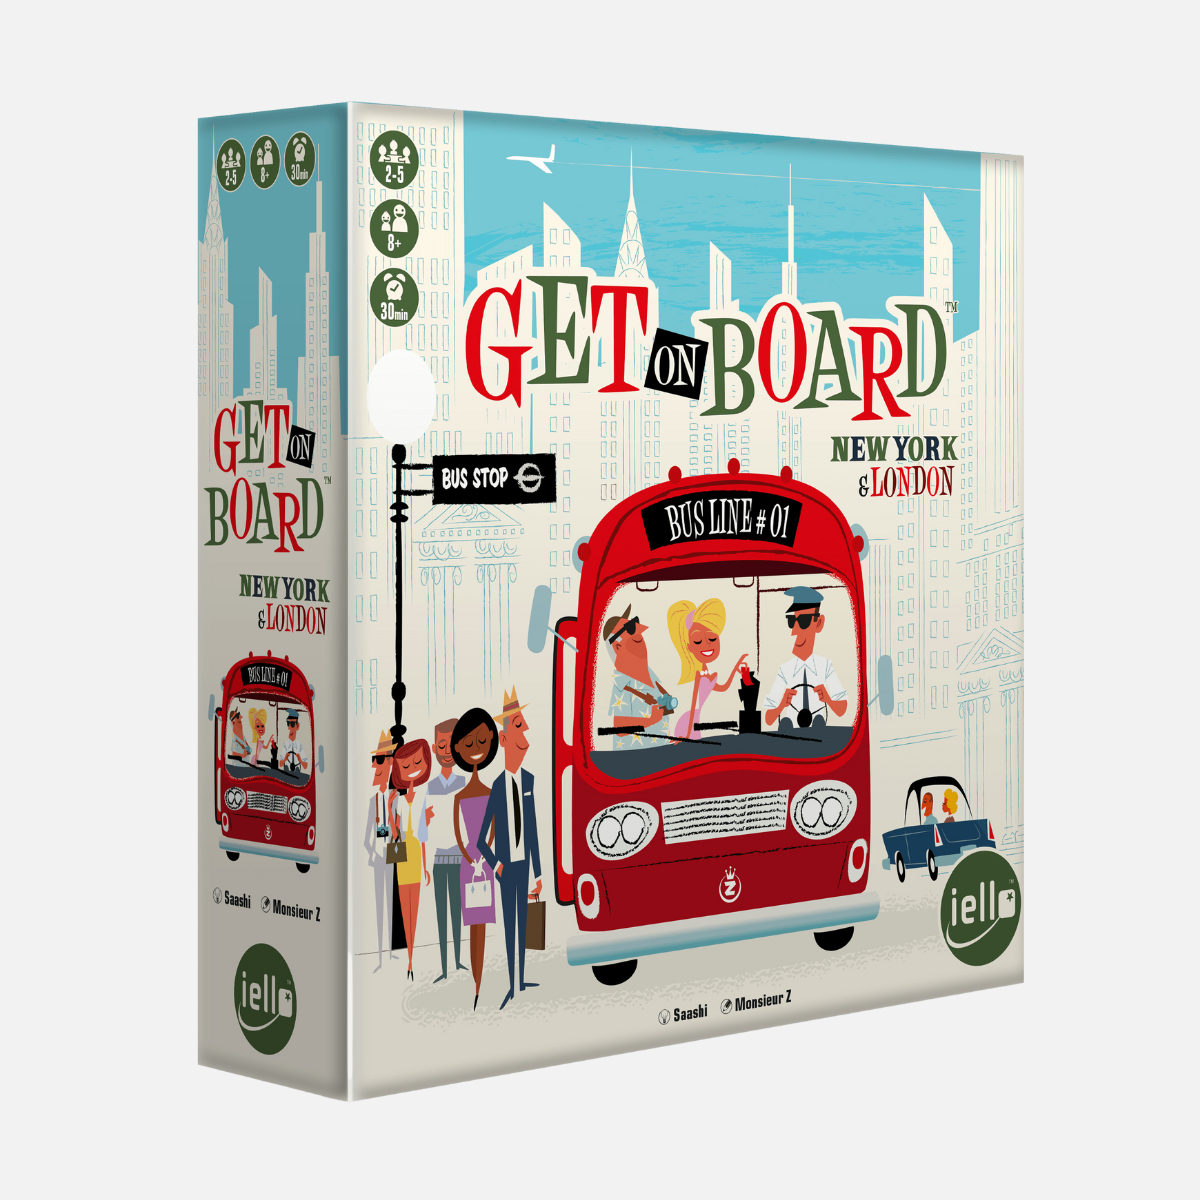 Get on board NY & London board game